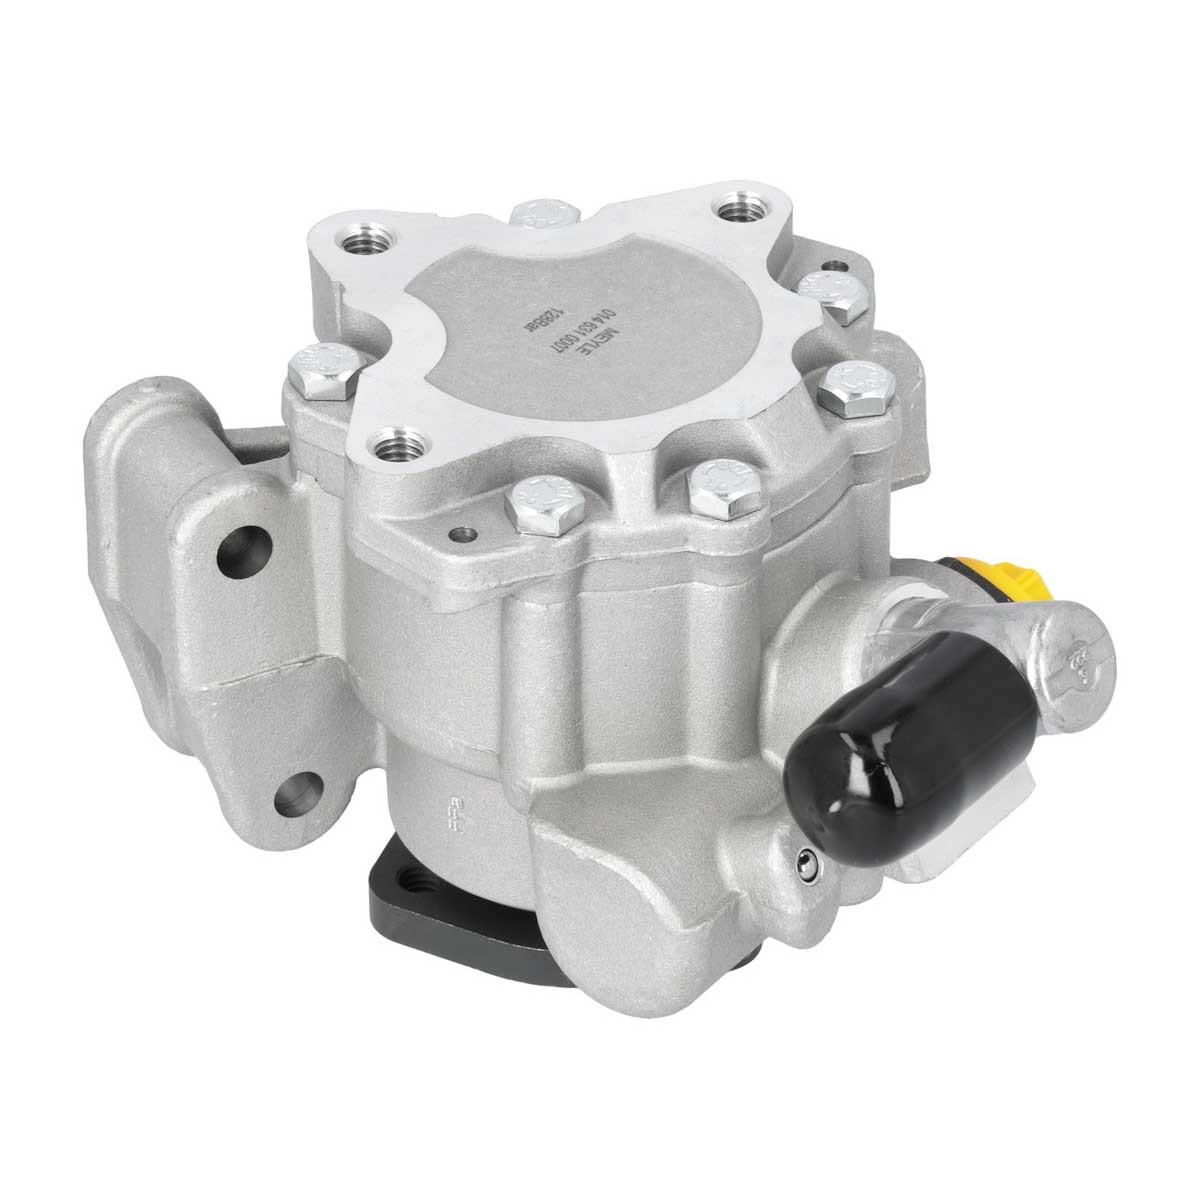 MEYLE Hydraulic steering pump 014 631 0007 suitable for MERCEDES-BENZ E-Class